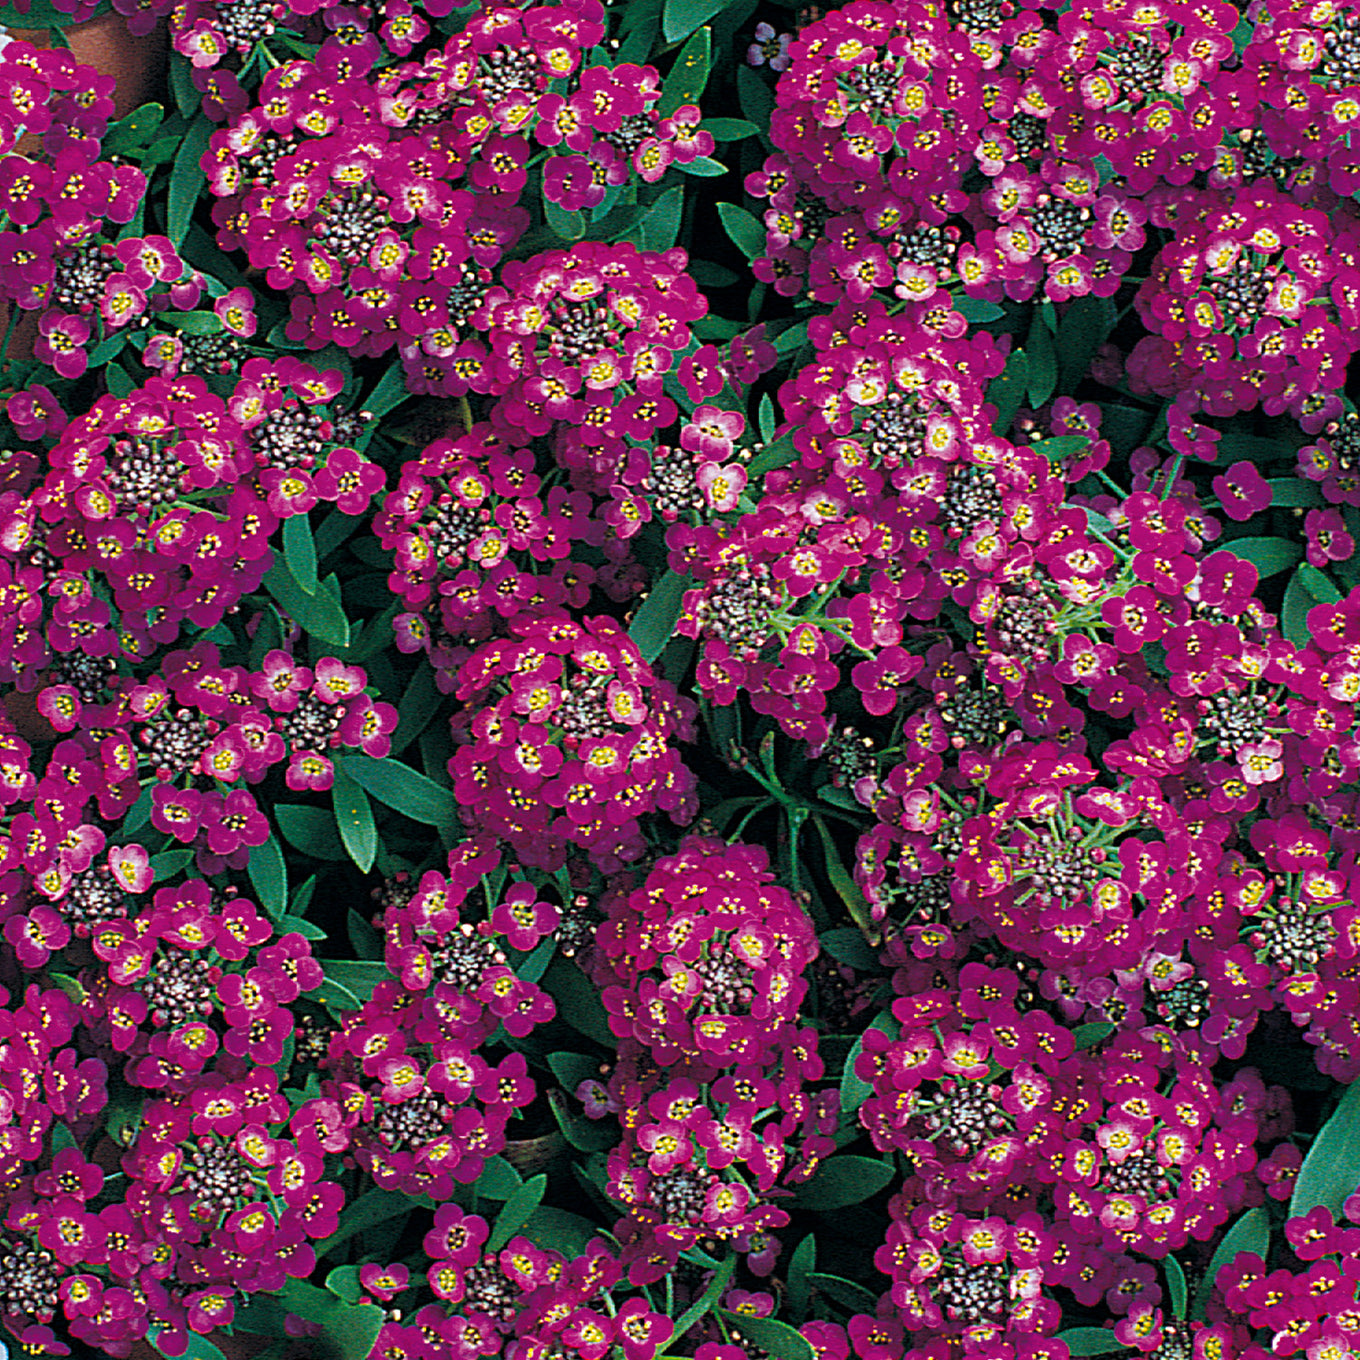 Royal Carpet Alyssum flower seeds from Ferry-Morse, fully grown and blooming their beautiful purple blossoms.